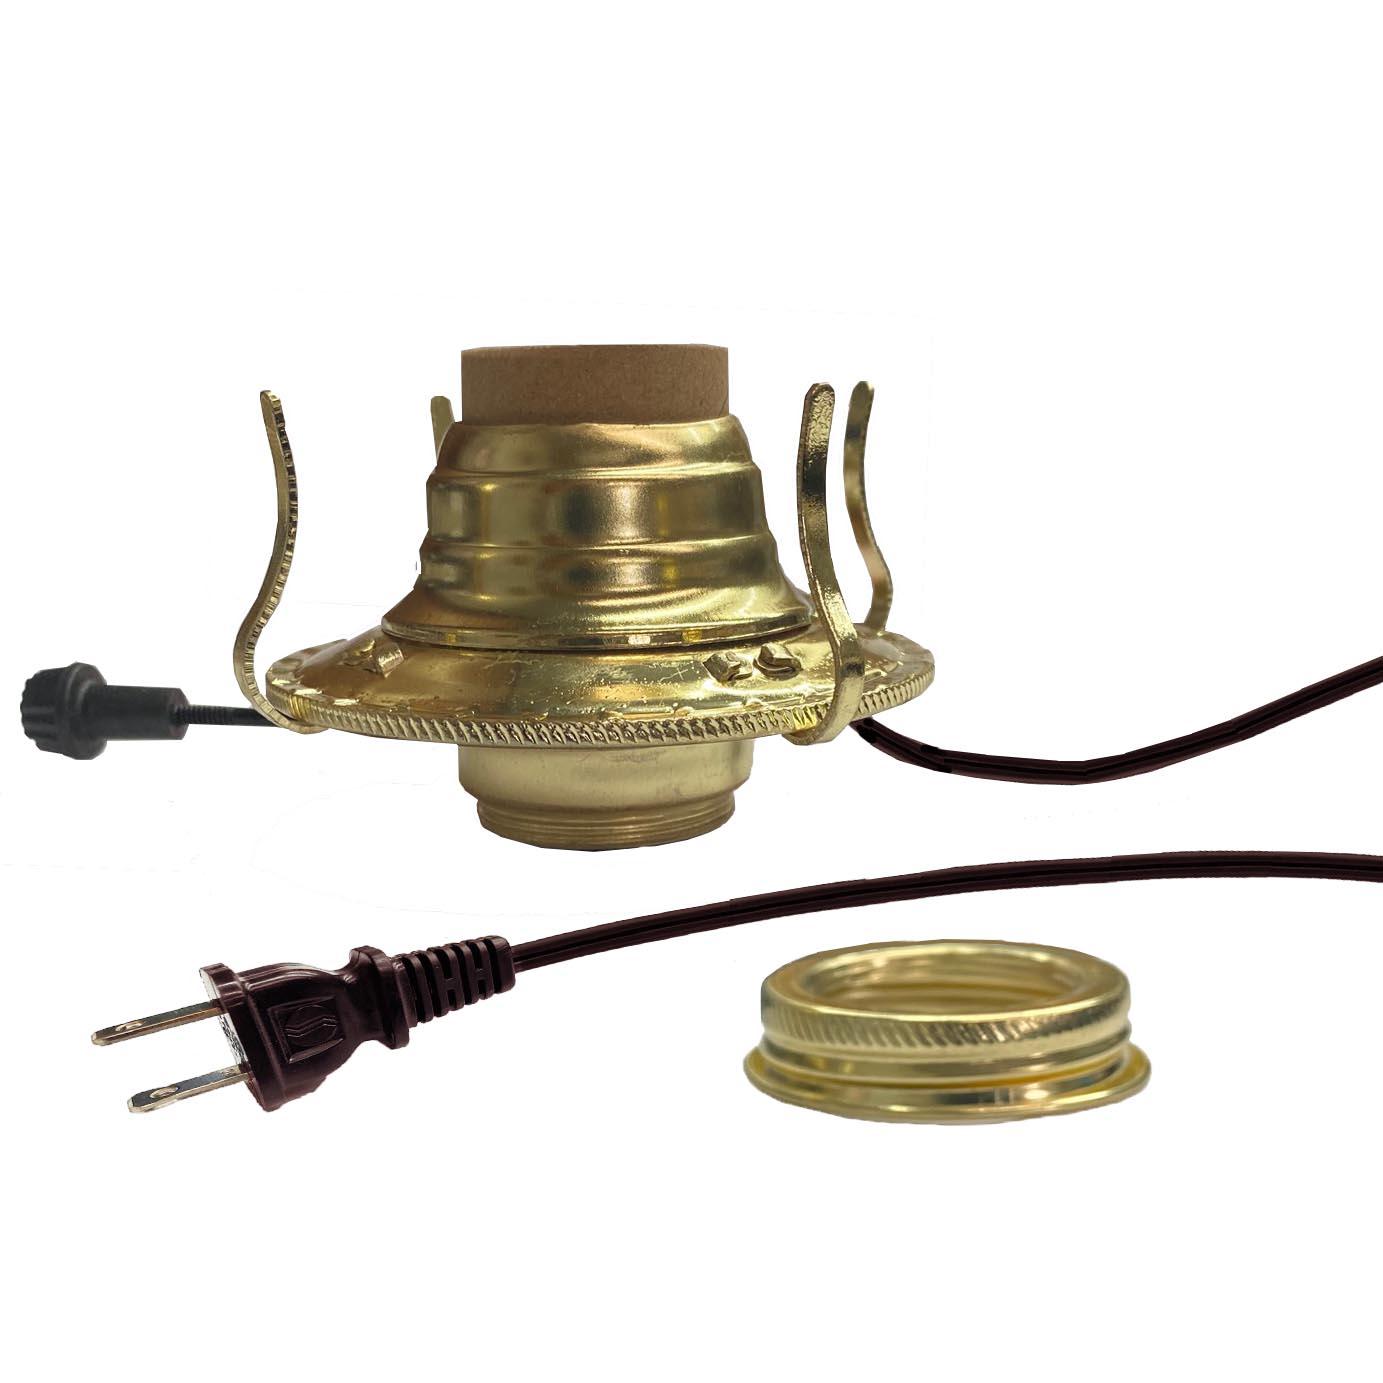 Electric Oil Lamp Burners, Brass Plated #2-Brown- Paxton Hardware ltd